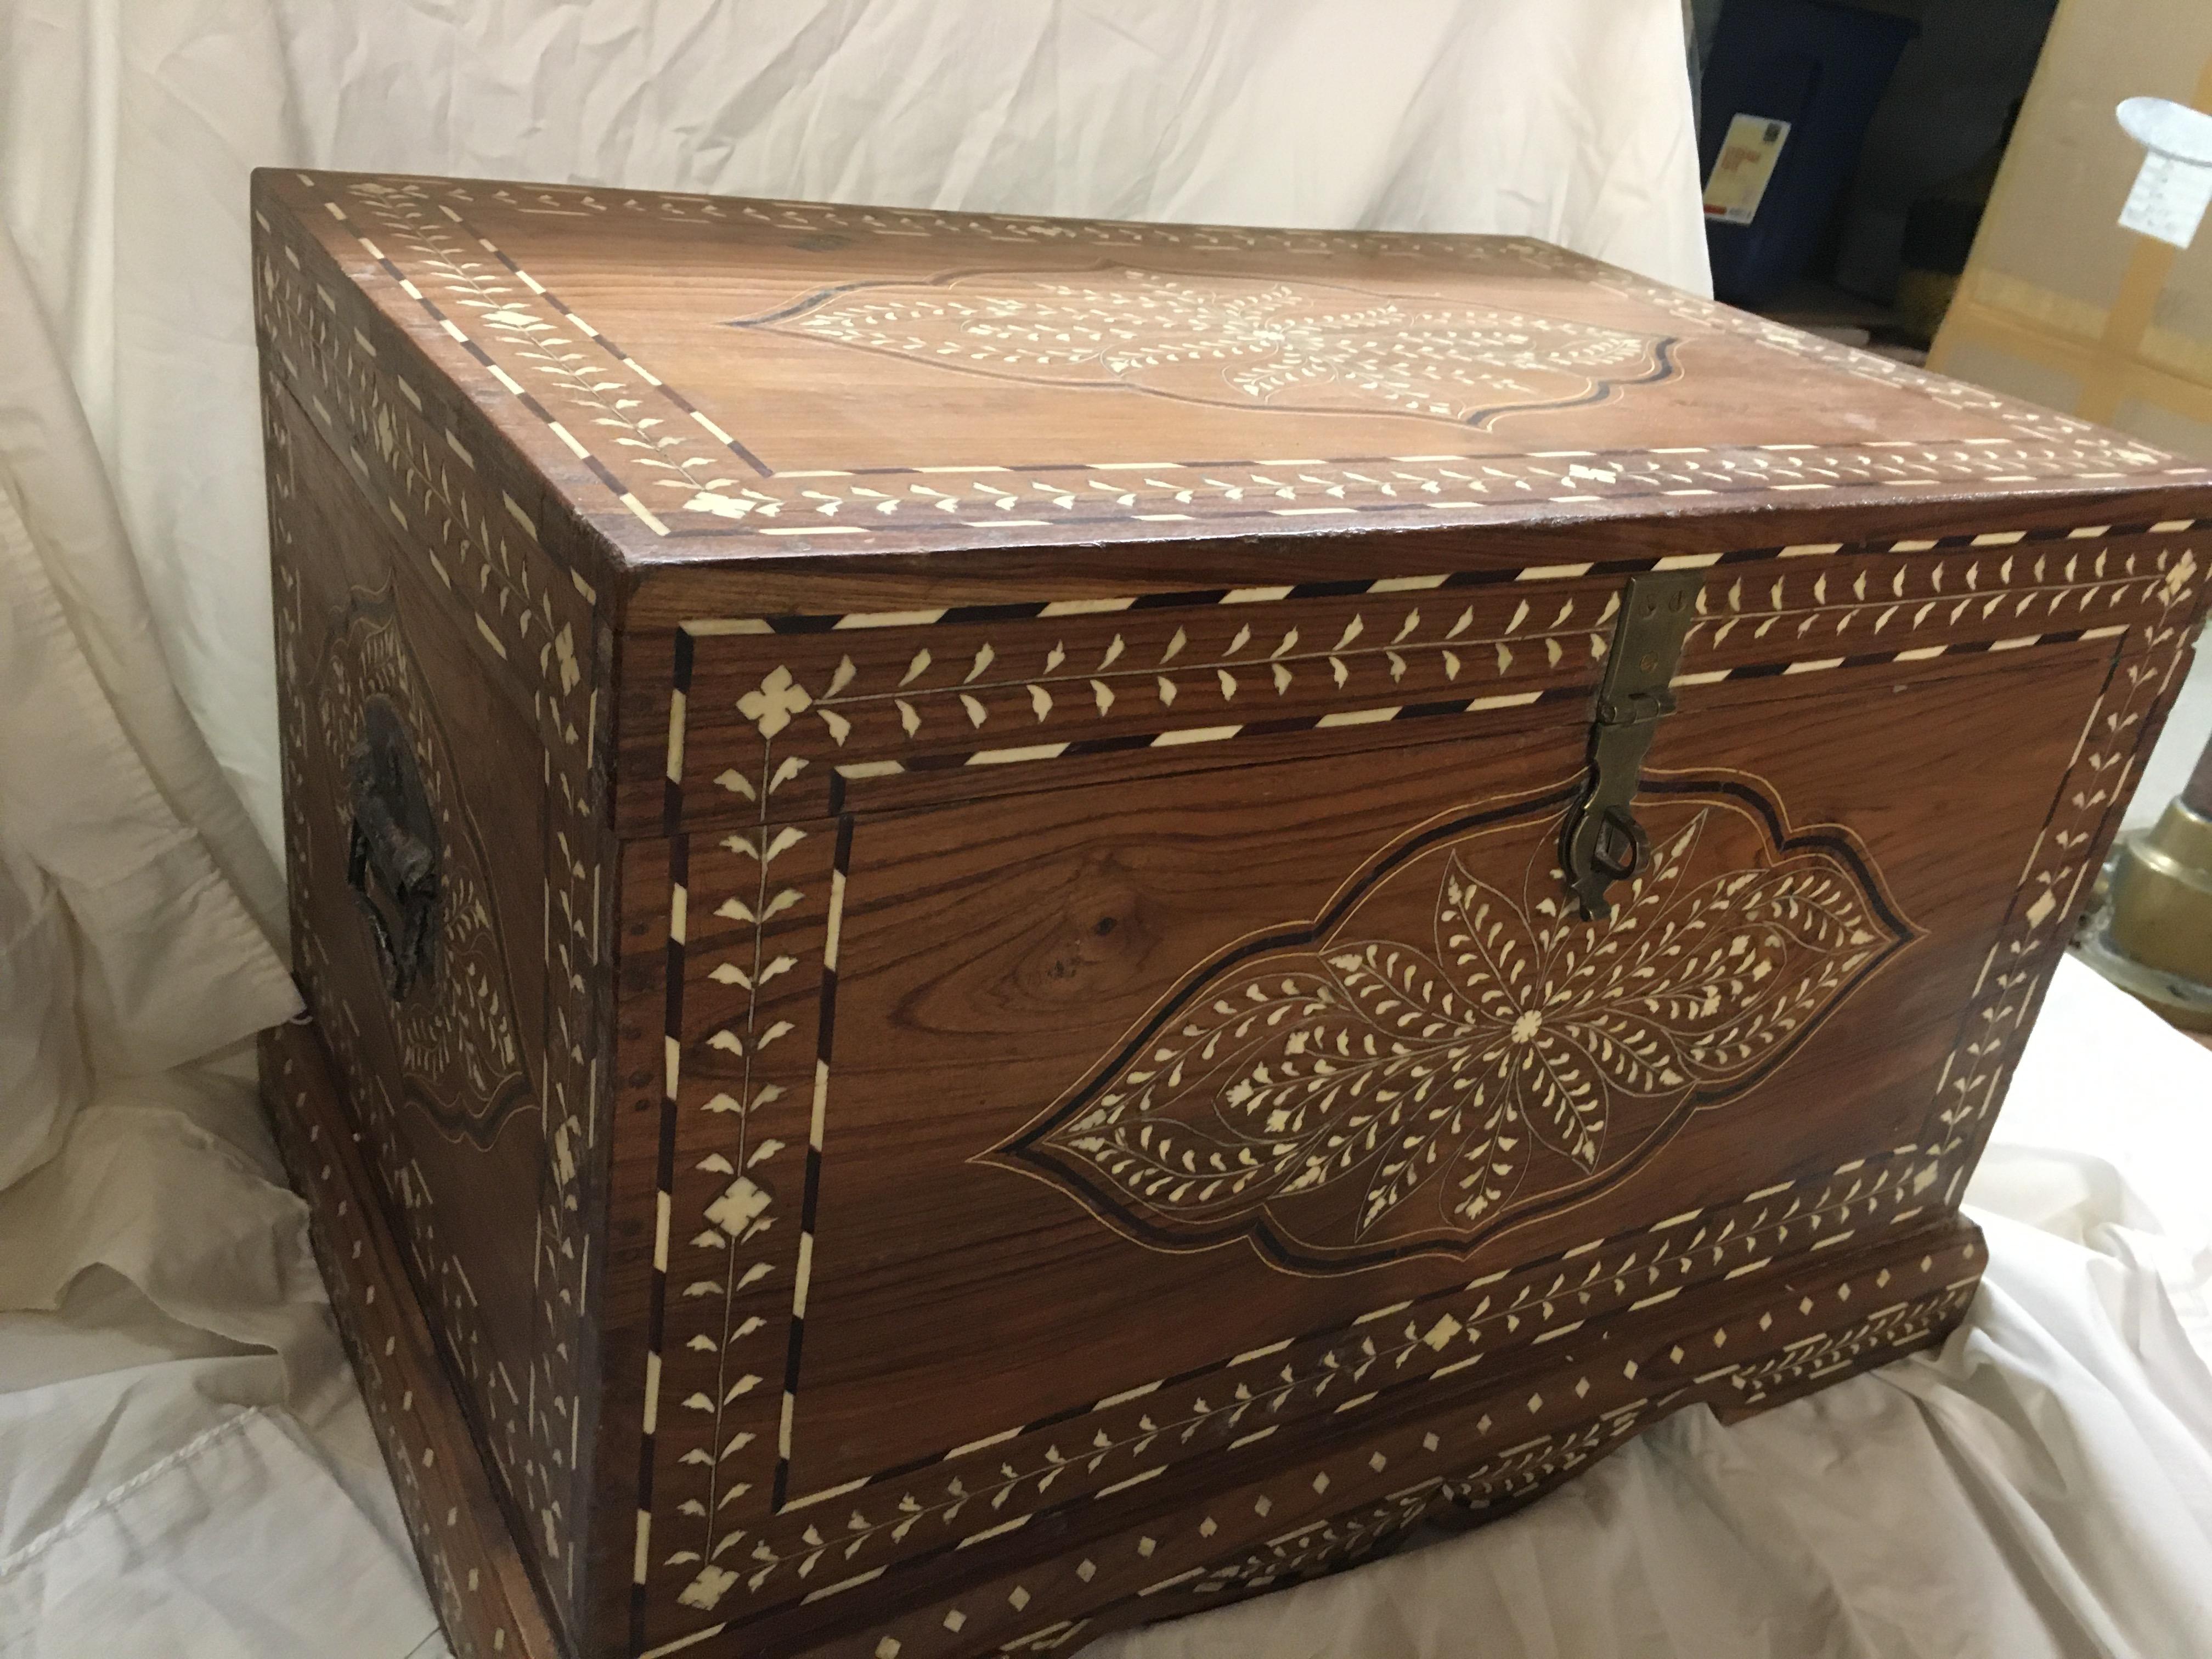 An incredibly intricate teak chest with bone (camel) and rosewood inlay. Always harder to work with smaller inlay pieces than large. Lovely patterns as well. Brass side handles and hasp. India, early 1900s. A couple of blemishes in the wood typical